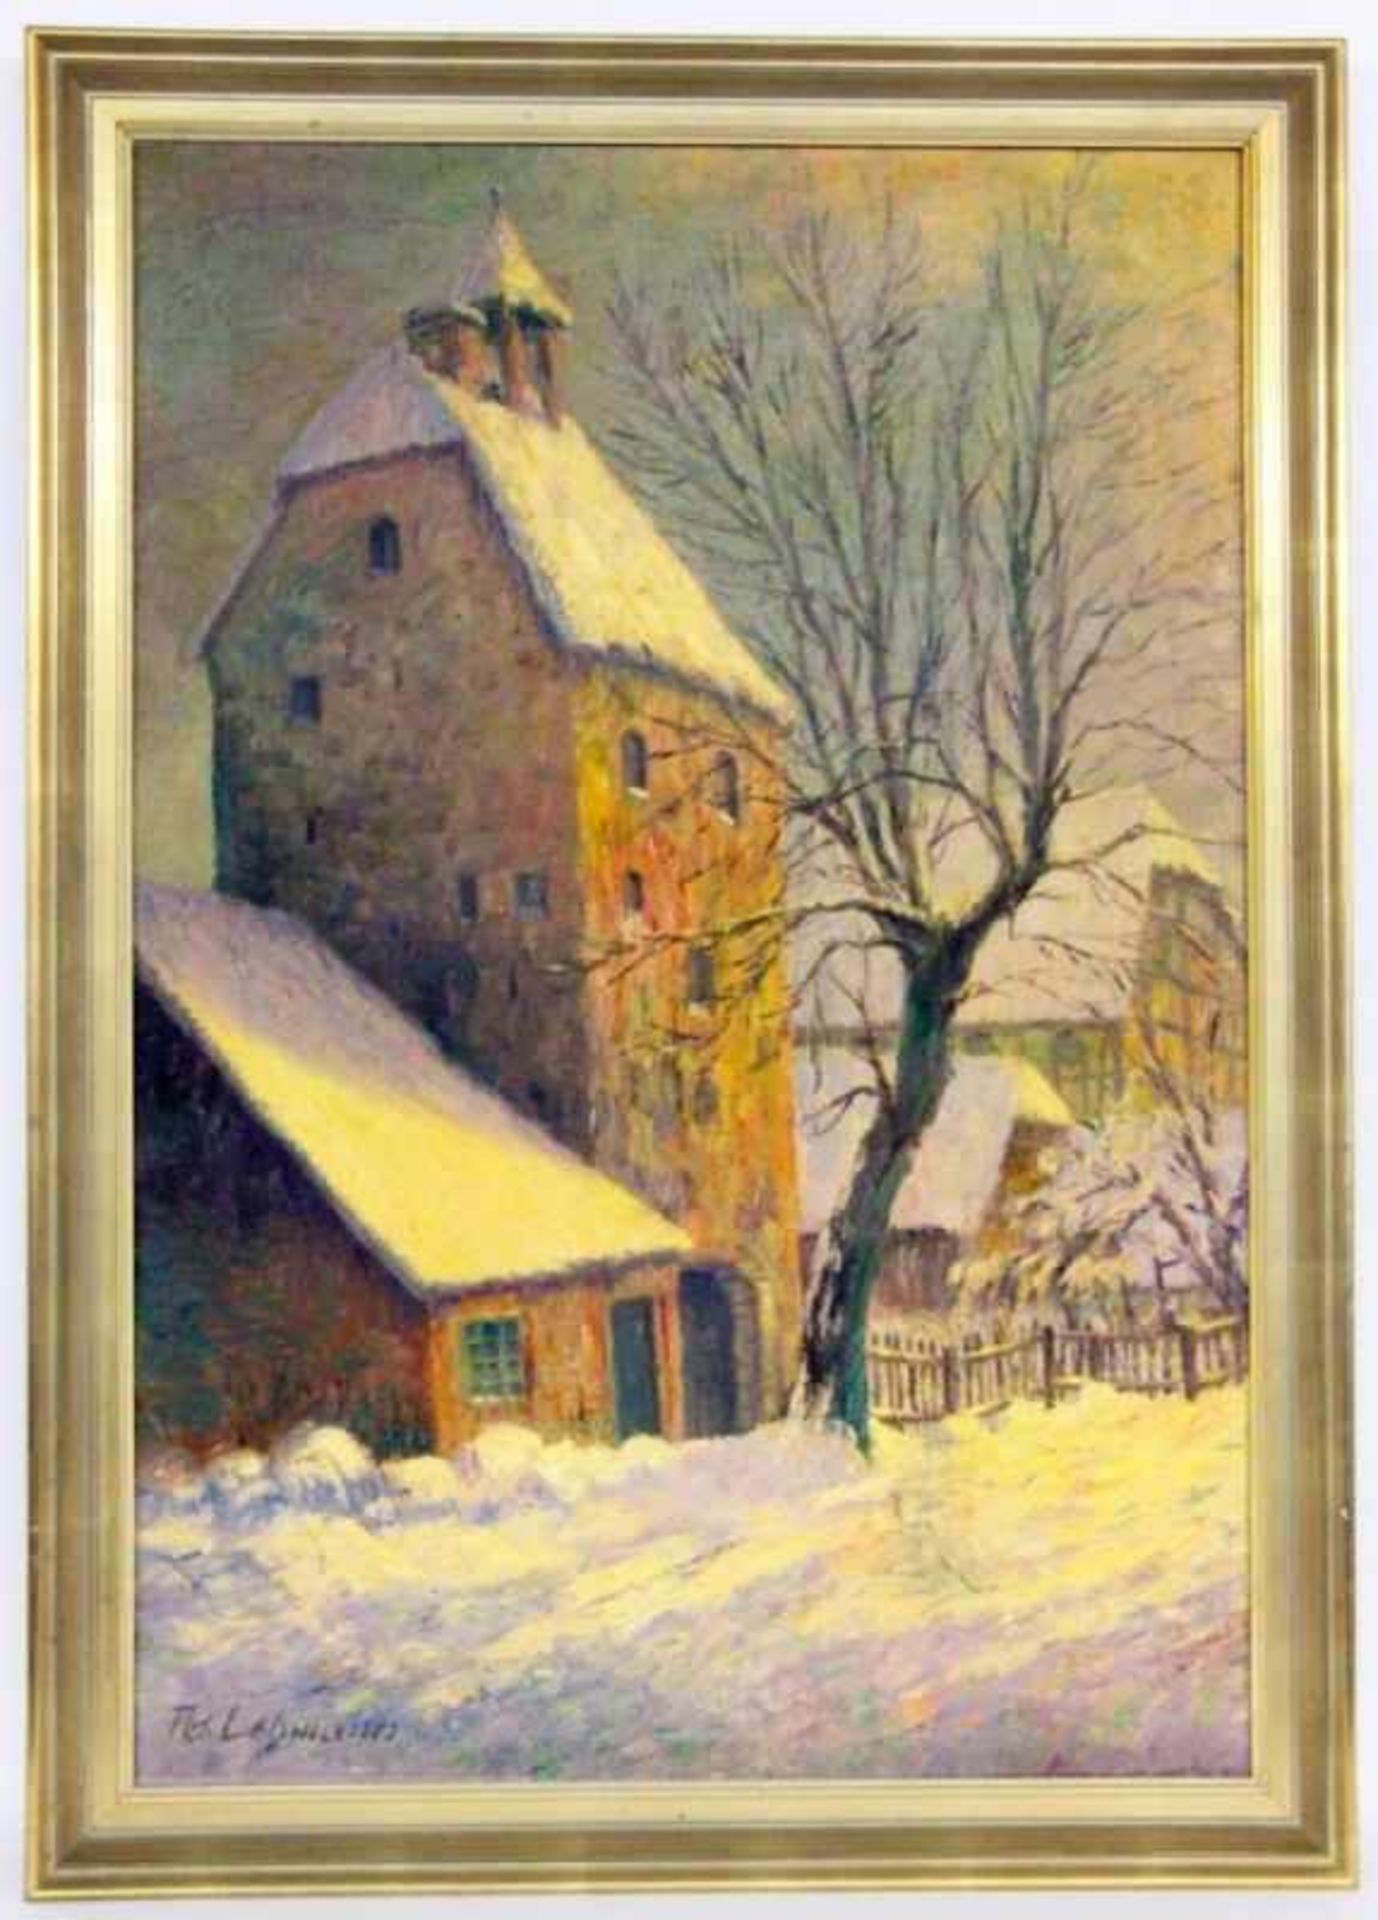 LEHMANN, PETER 1895 - Remagen - 1961 Winter Landscape with Houses. Oil on canvas, signed.125 x 85